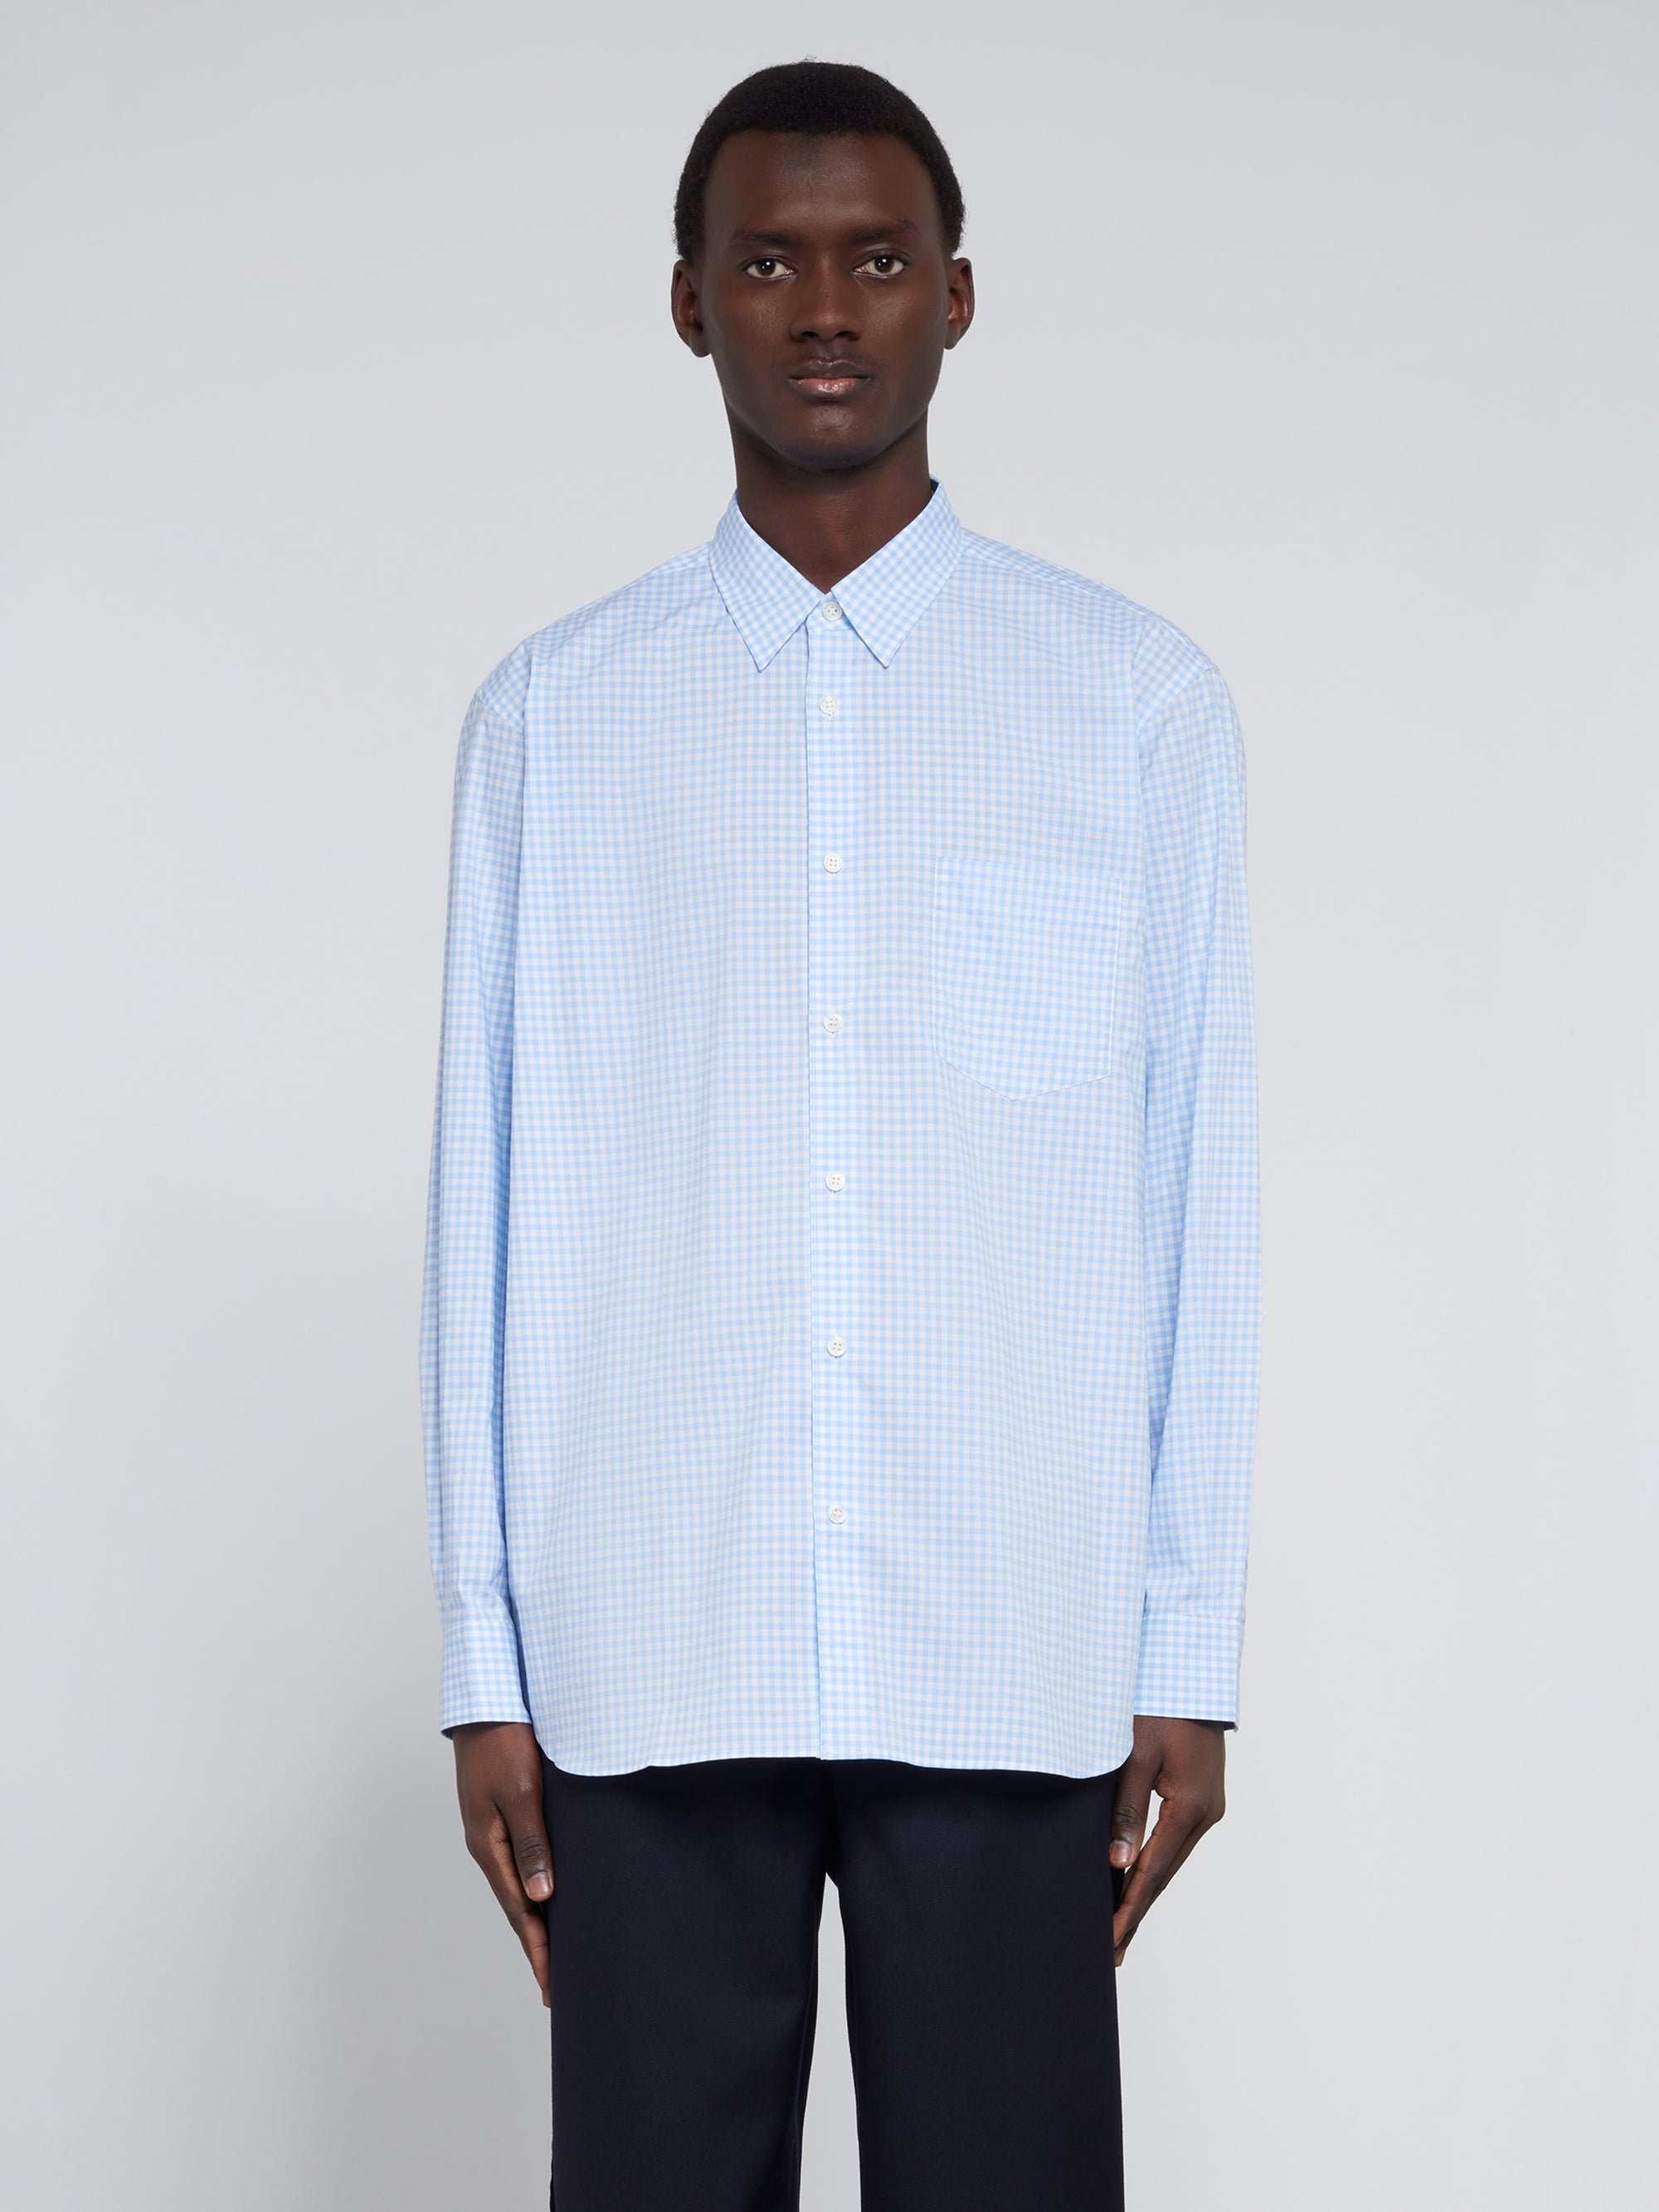 CDG Shirt Forever - Wide Fit Small Check Woven Cotton Shirt - (Blue) view 2